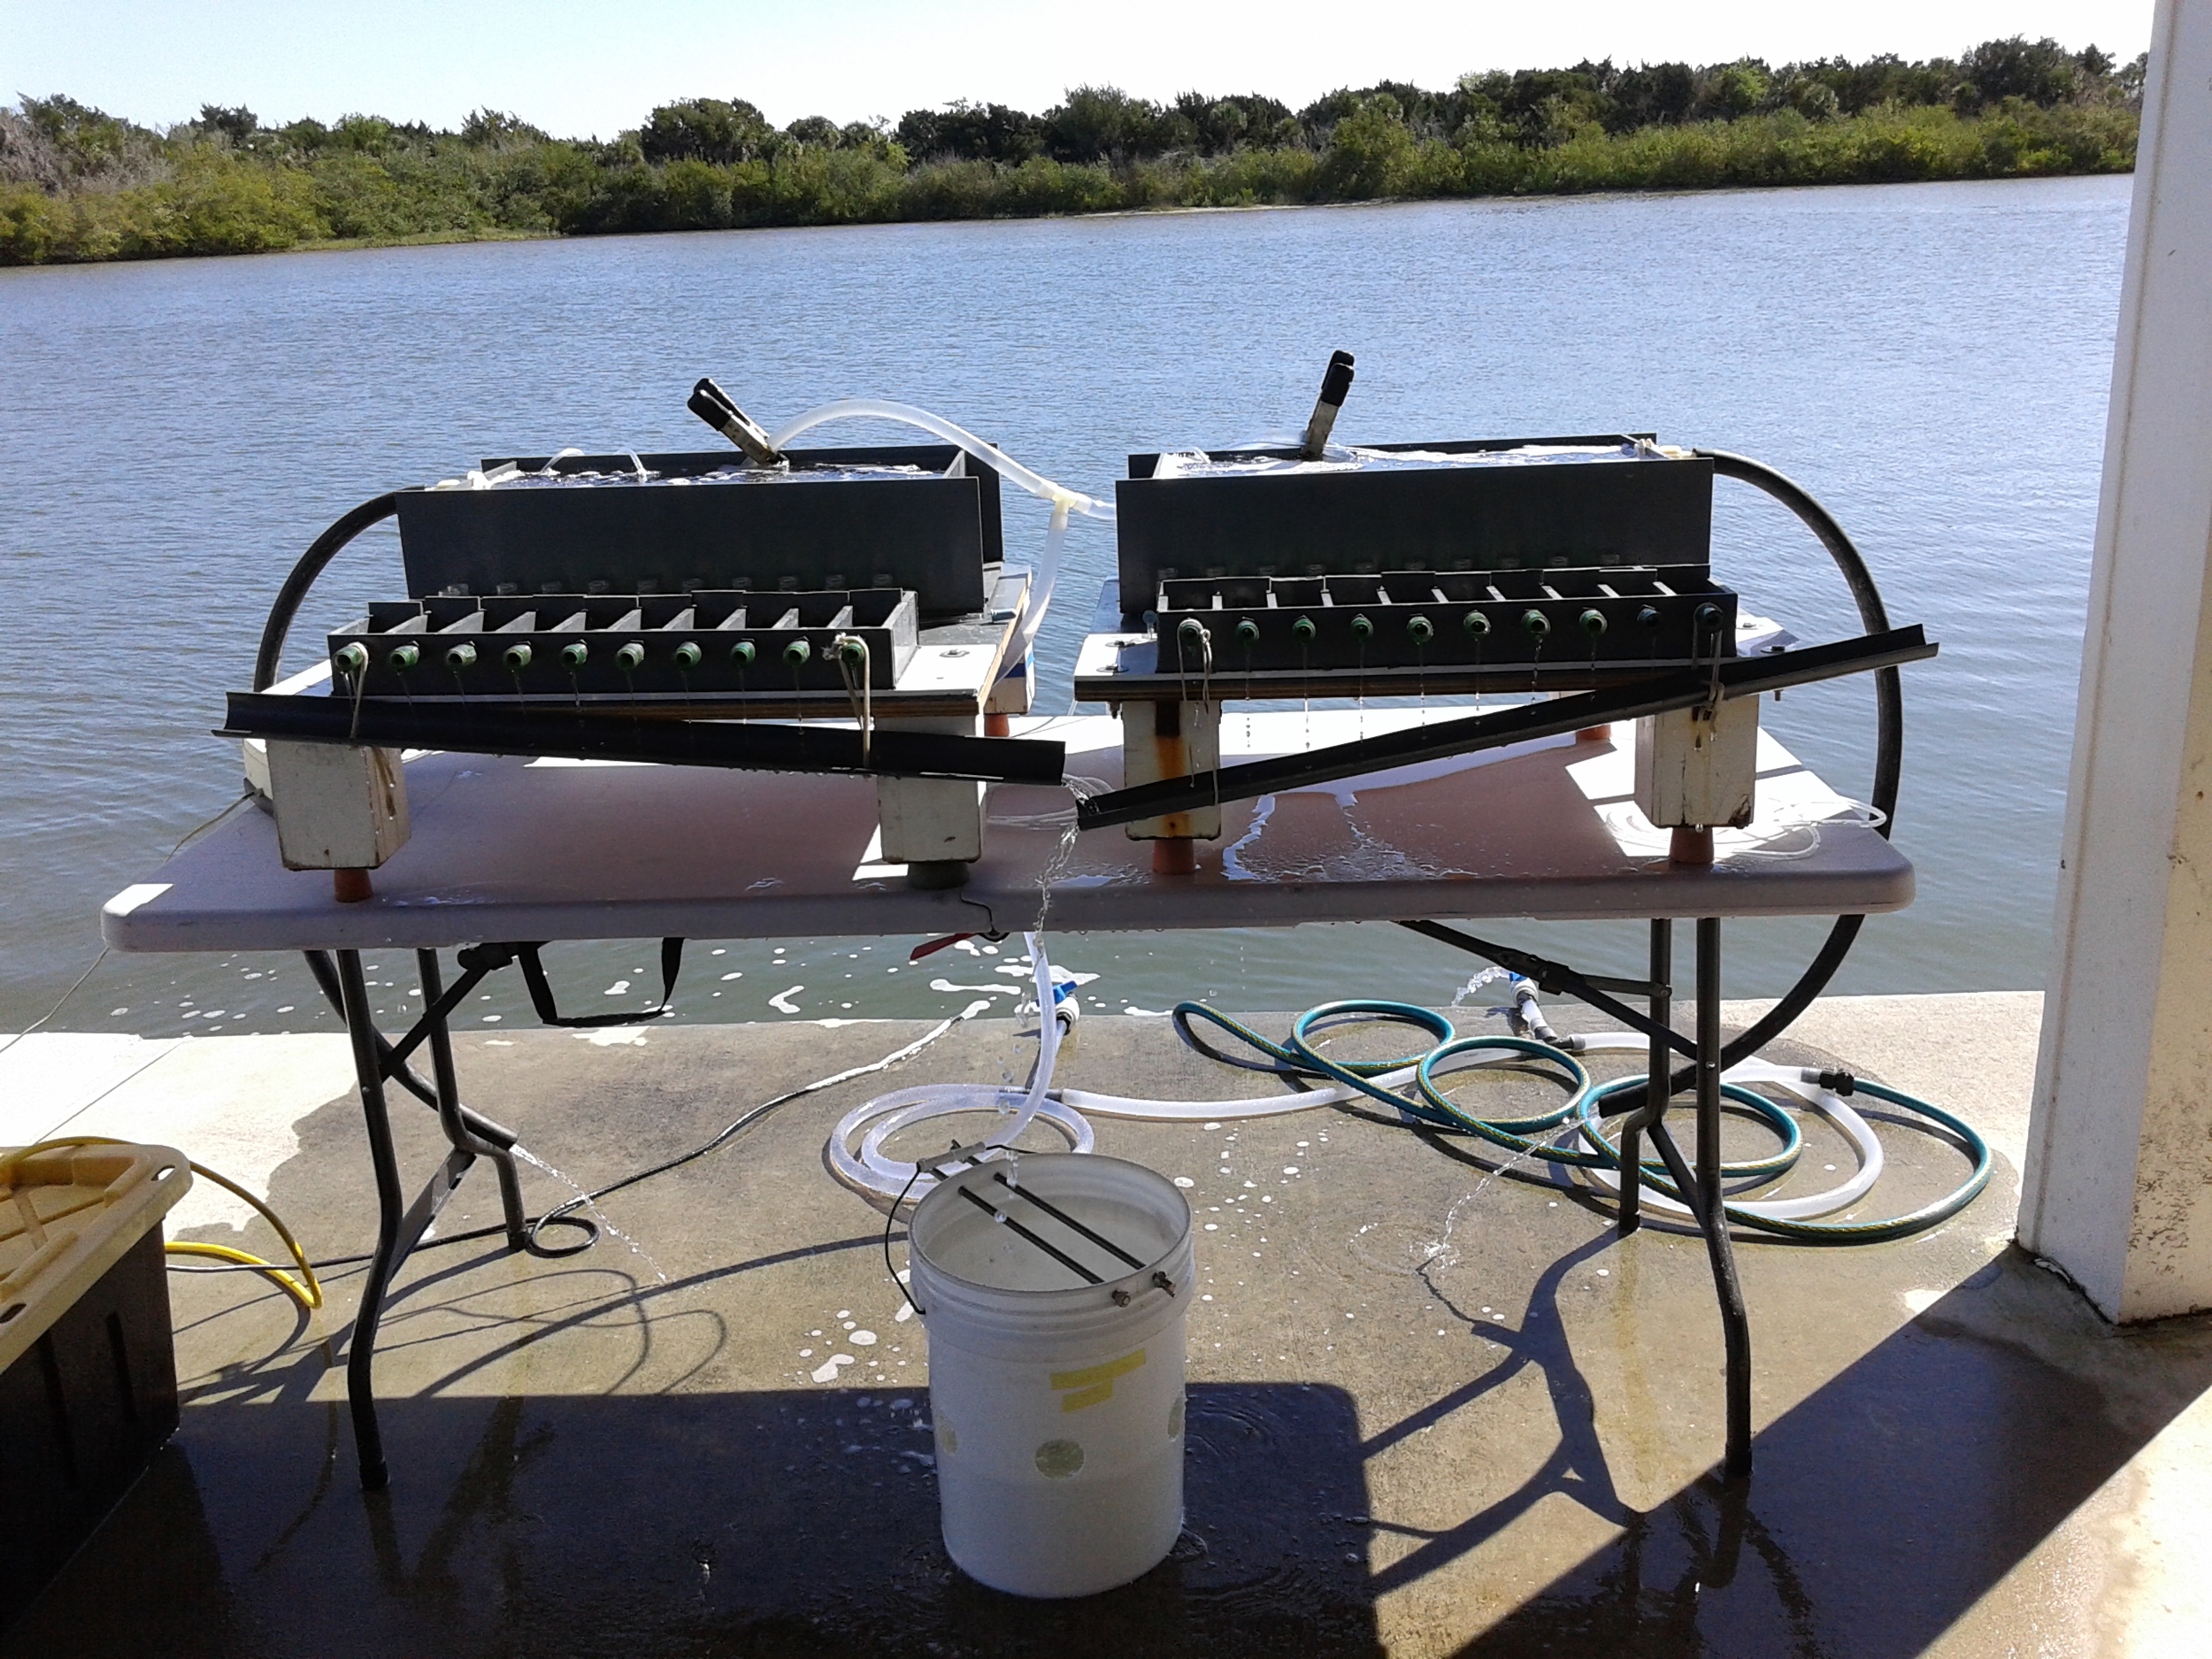  We are also conducting feeding experiments in "monster" raceways to assess feeding efficiency of bivalve grazers 